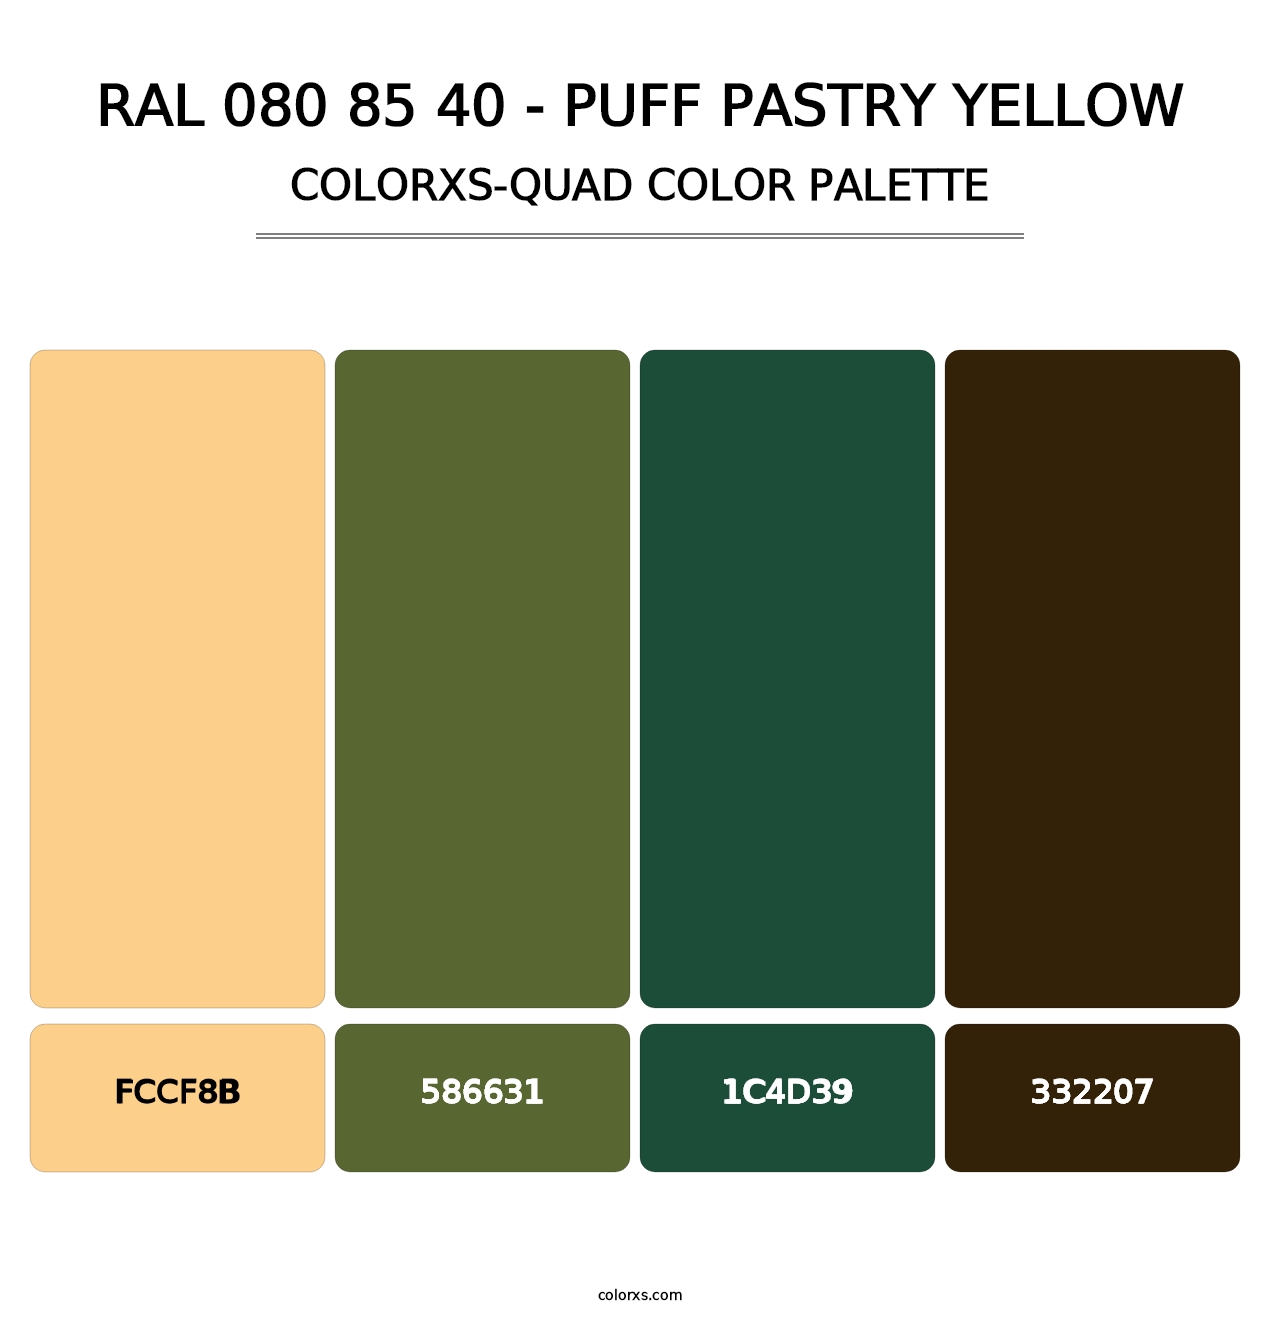 RAL 080 85 40 - Puff Pastry Yellow - Colorxs Quad Palette